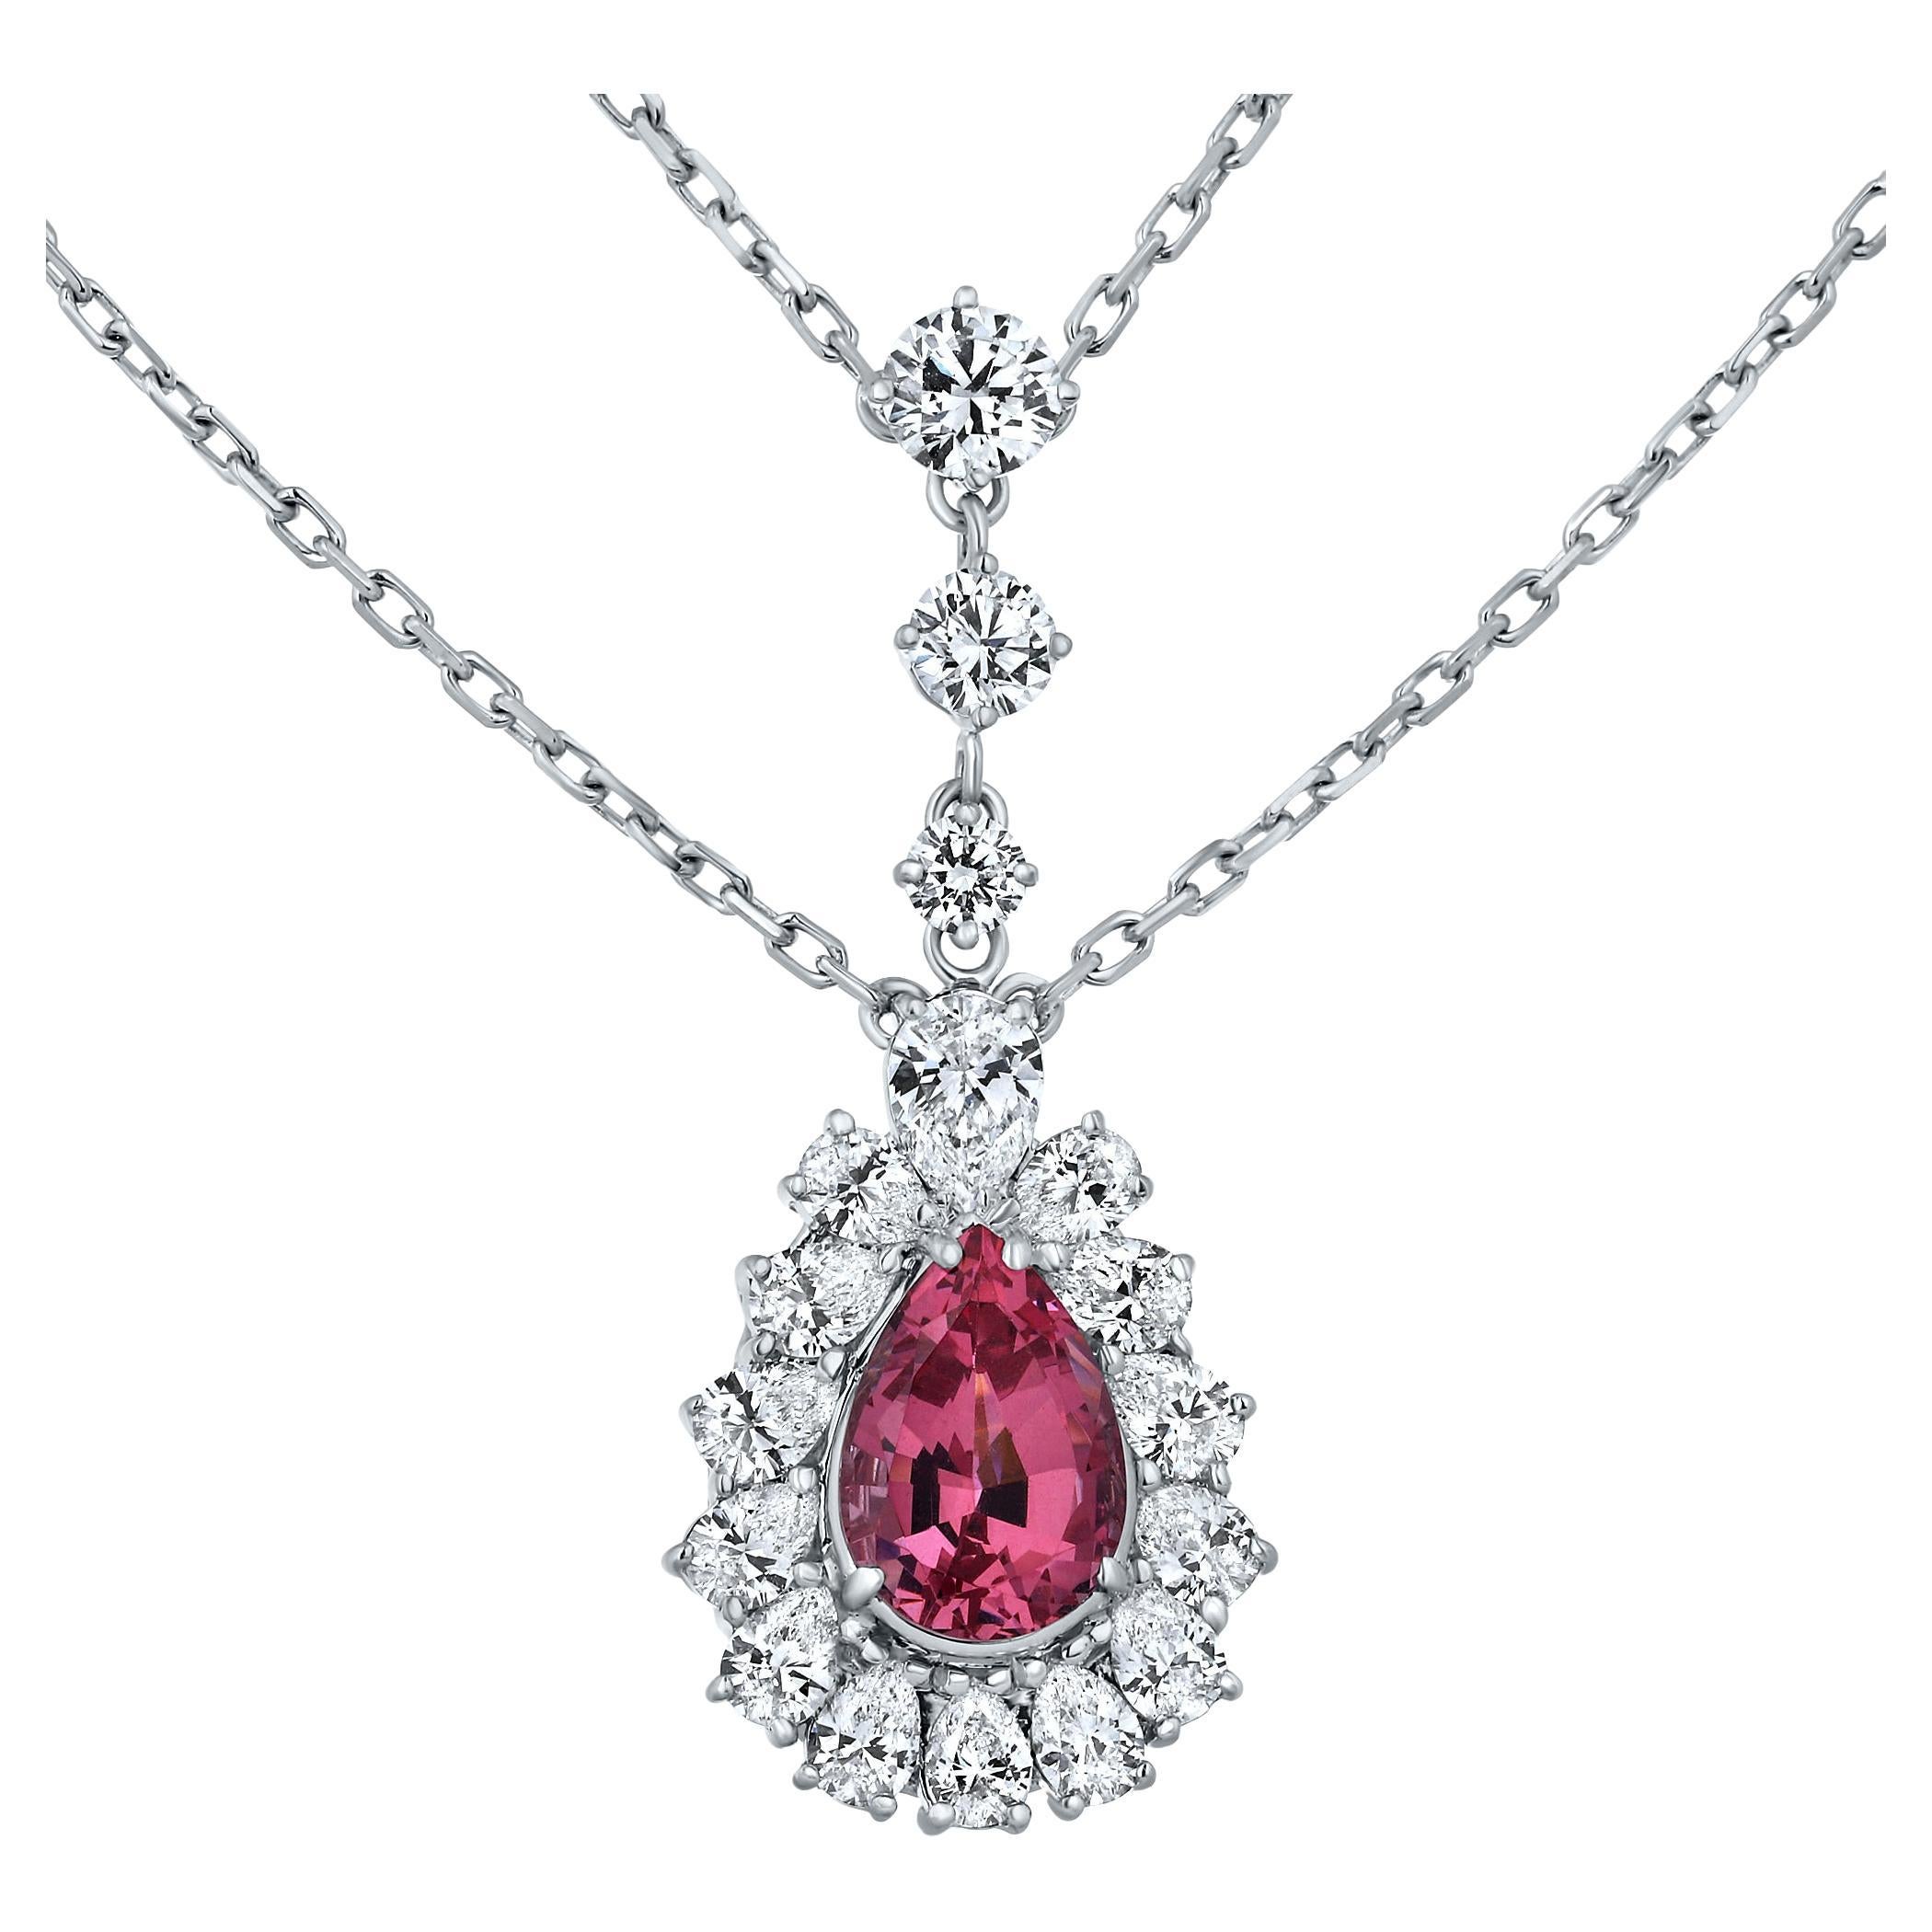 8.20 Carat Rare Pink Spinel Gemstone and Diamonds Necklace in 18K White Gold For Sale